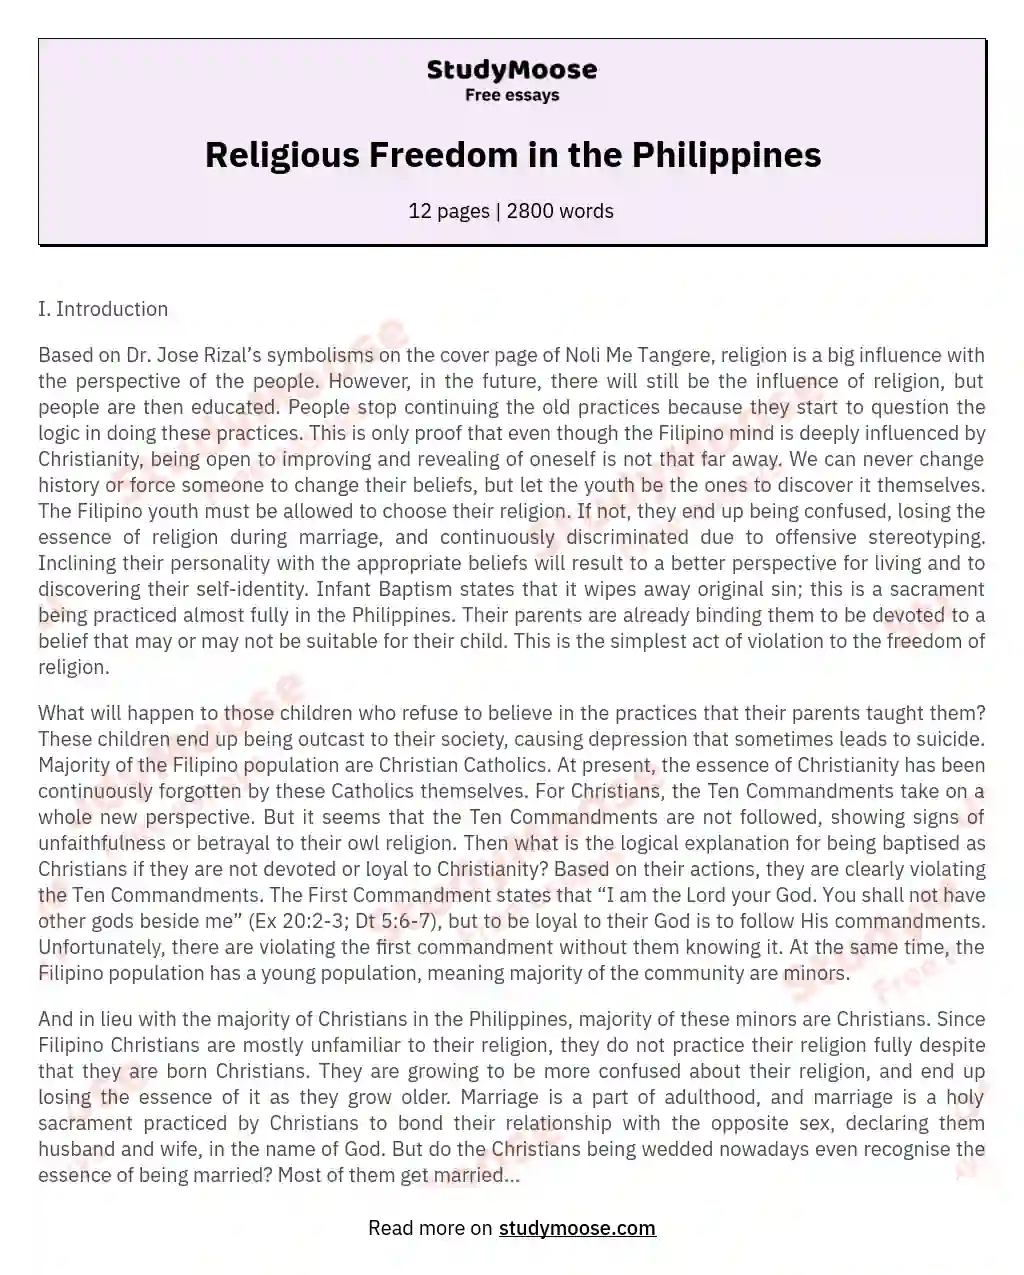 freedom of belief and religion essay